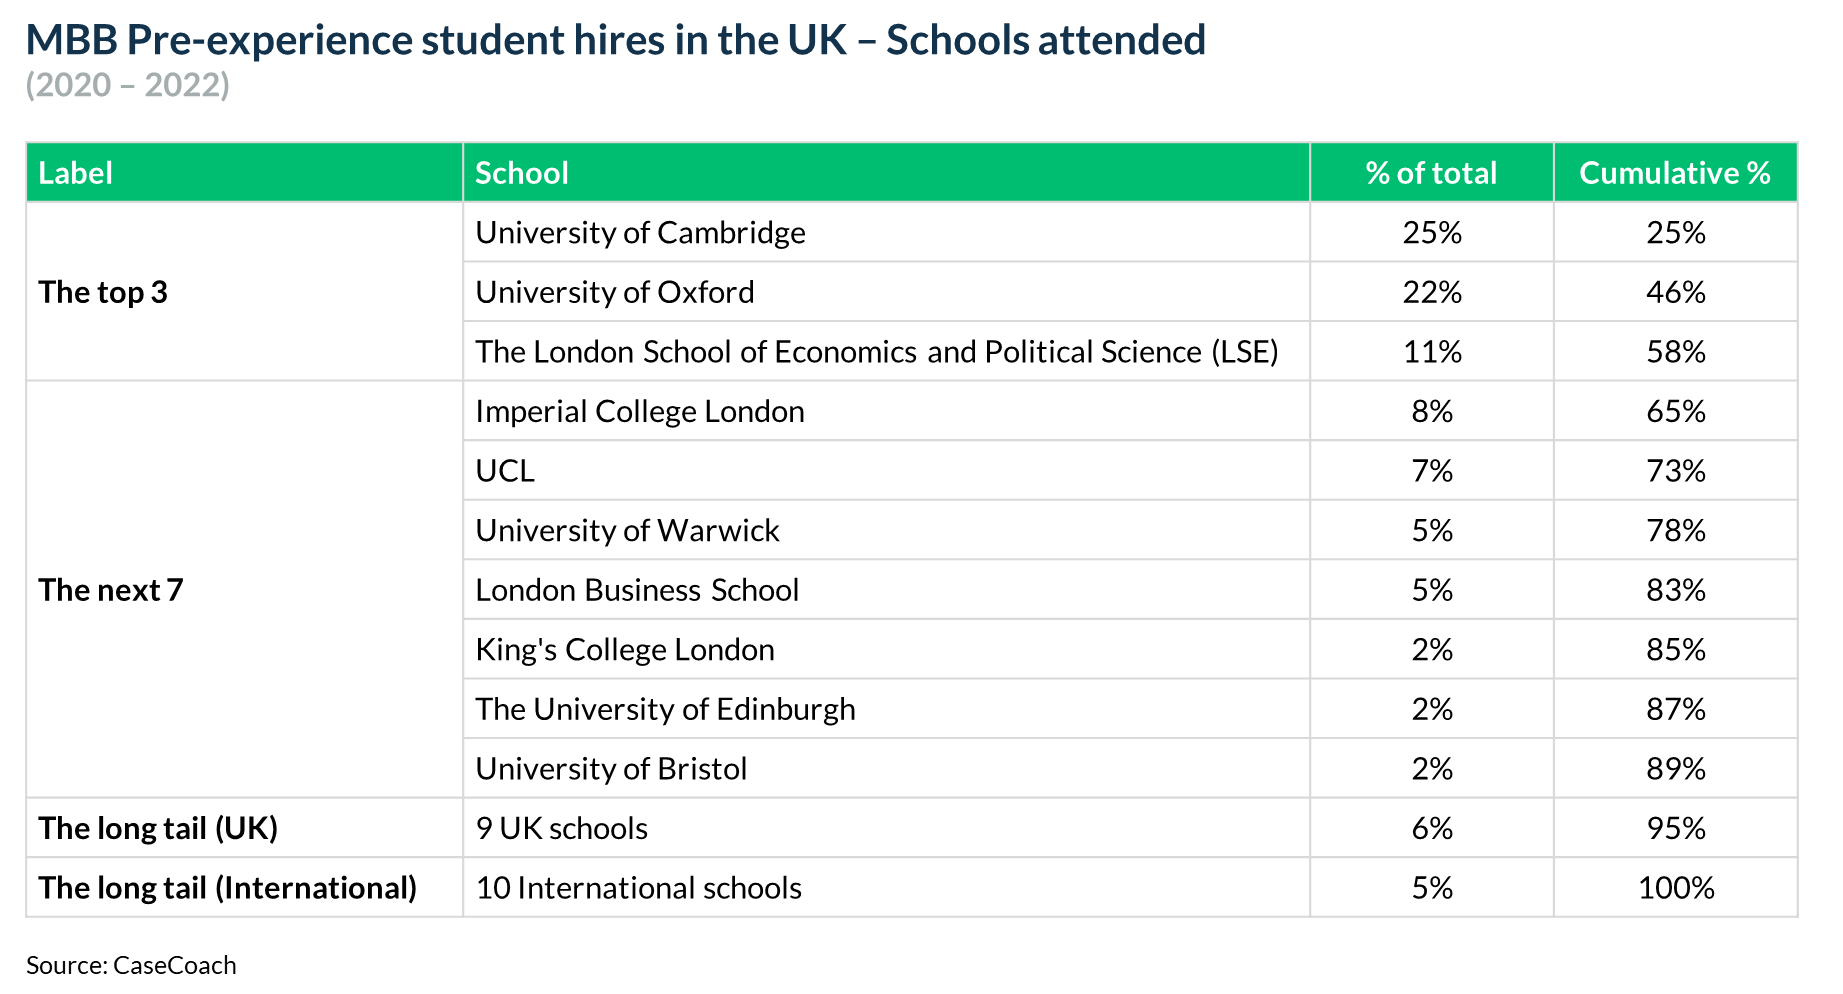 Schools attended by McKinsey, BCG, and Bain's pre-experience student hires in the UK